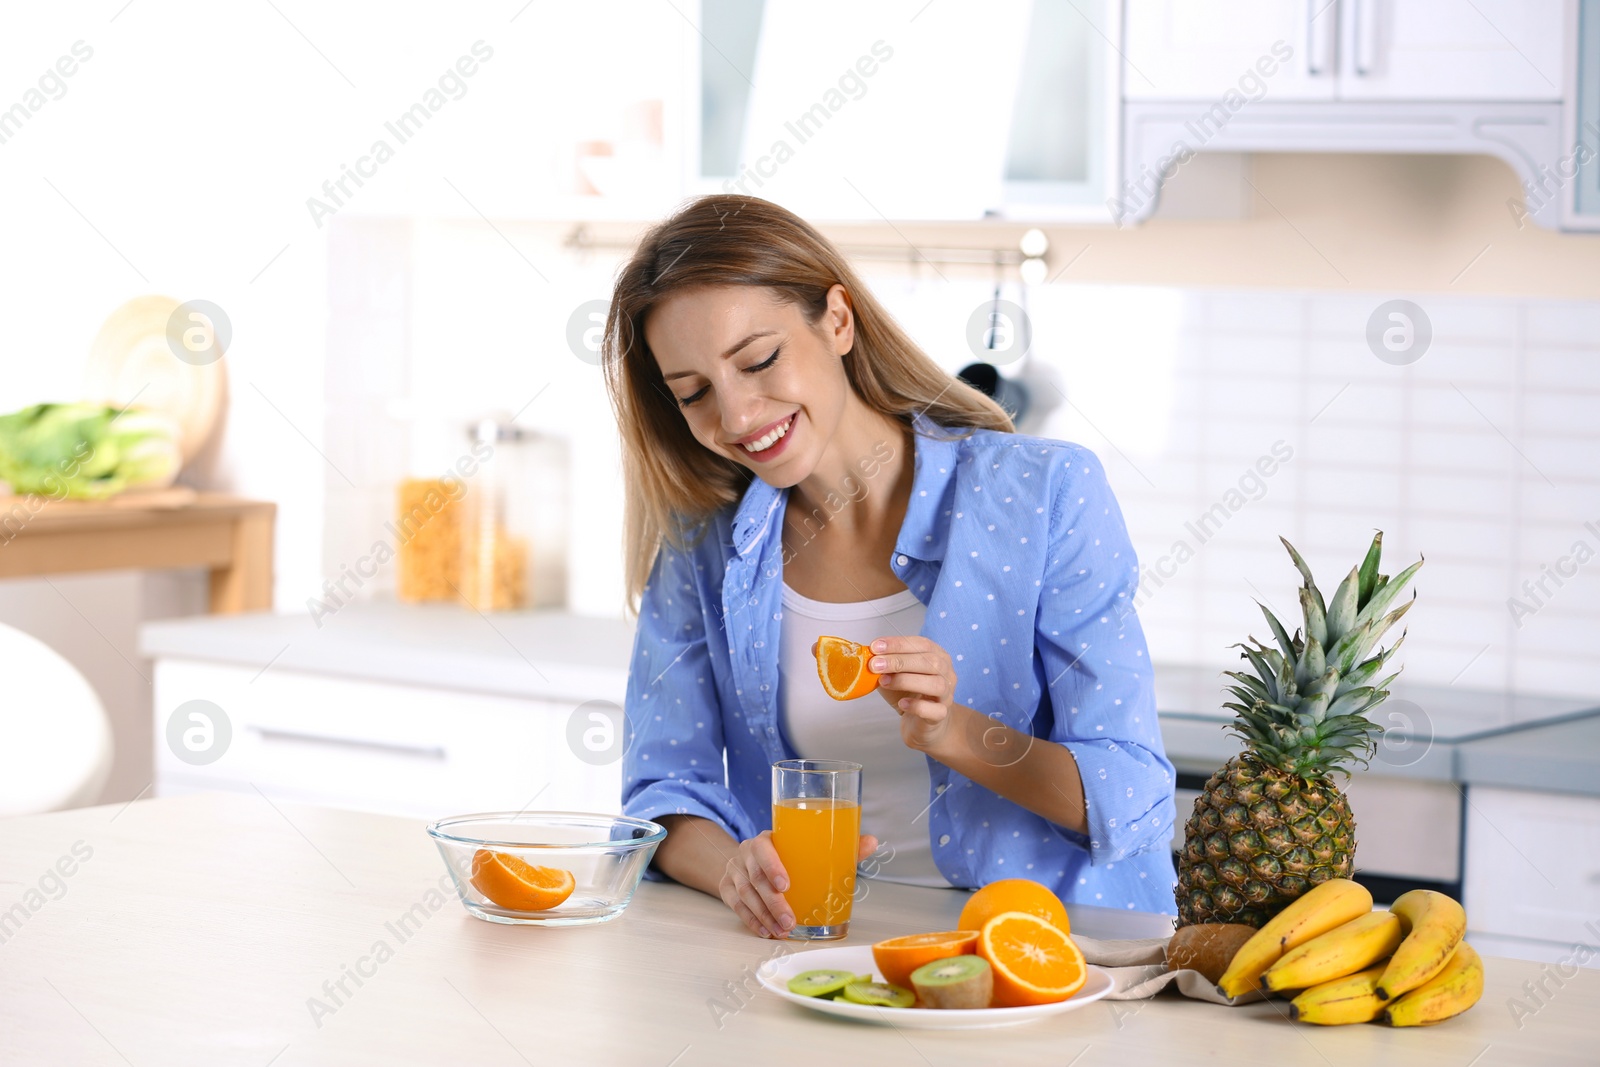 Photo of Woman making orange juice at table in kitchen. Healthy diet